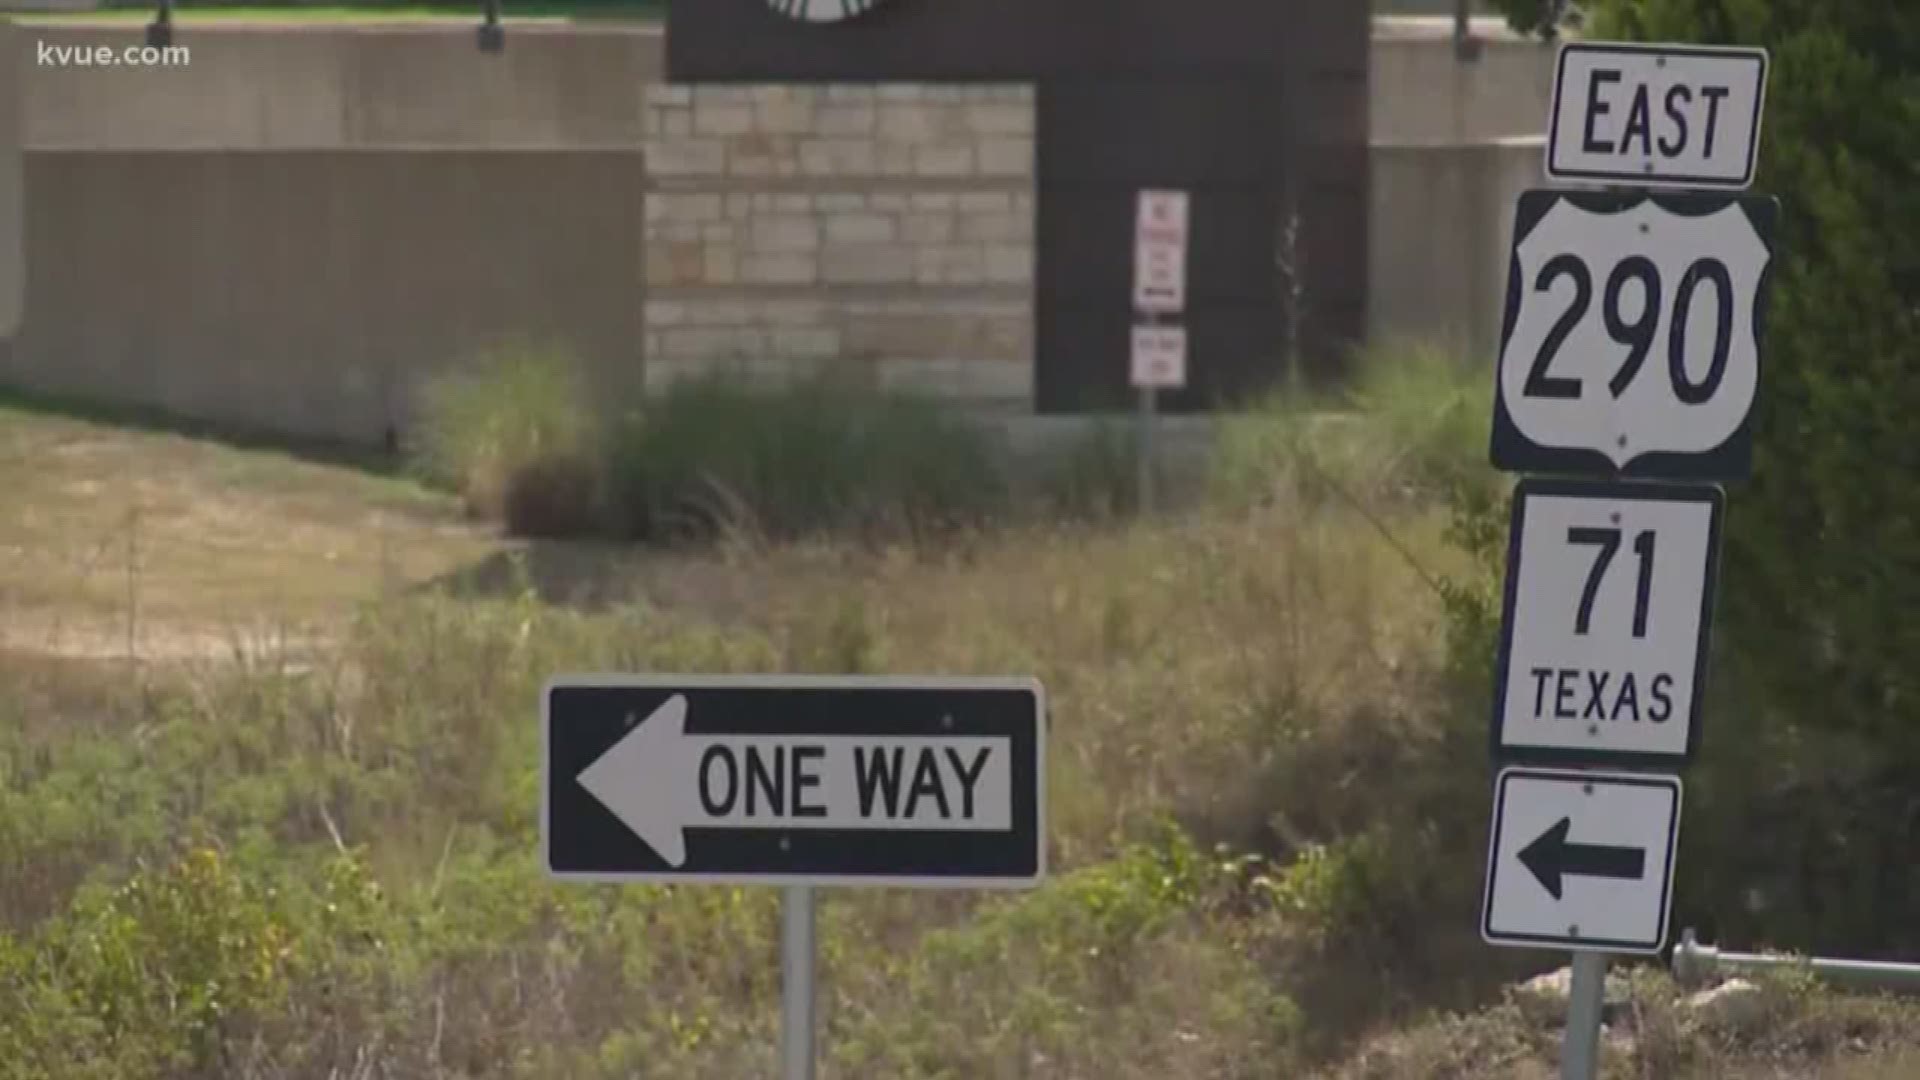 TxDOT is getting a green light on some major projects to get Austin traffic moving.